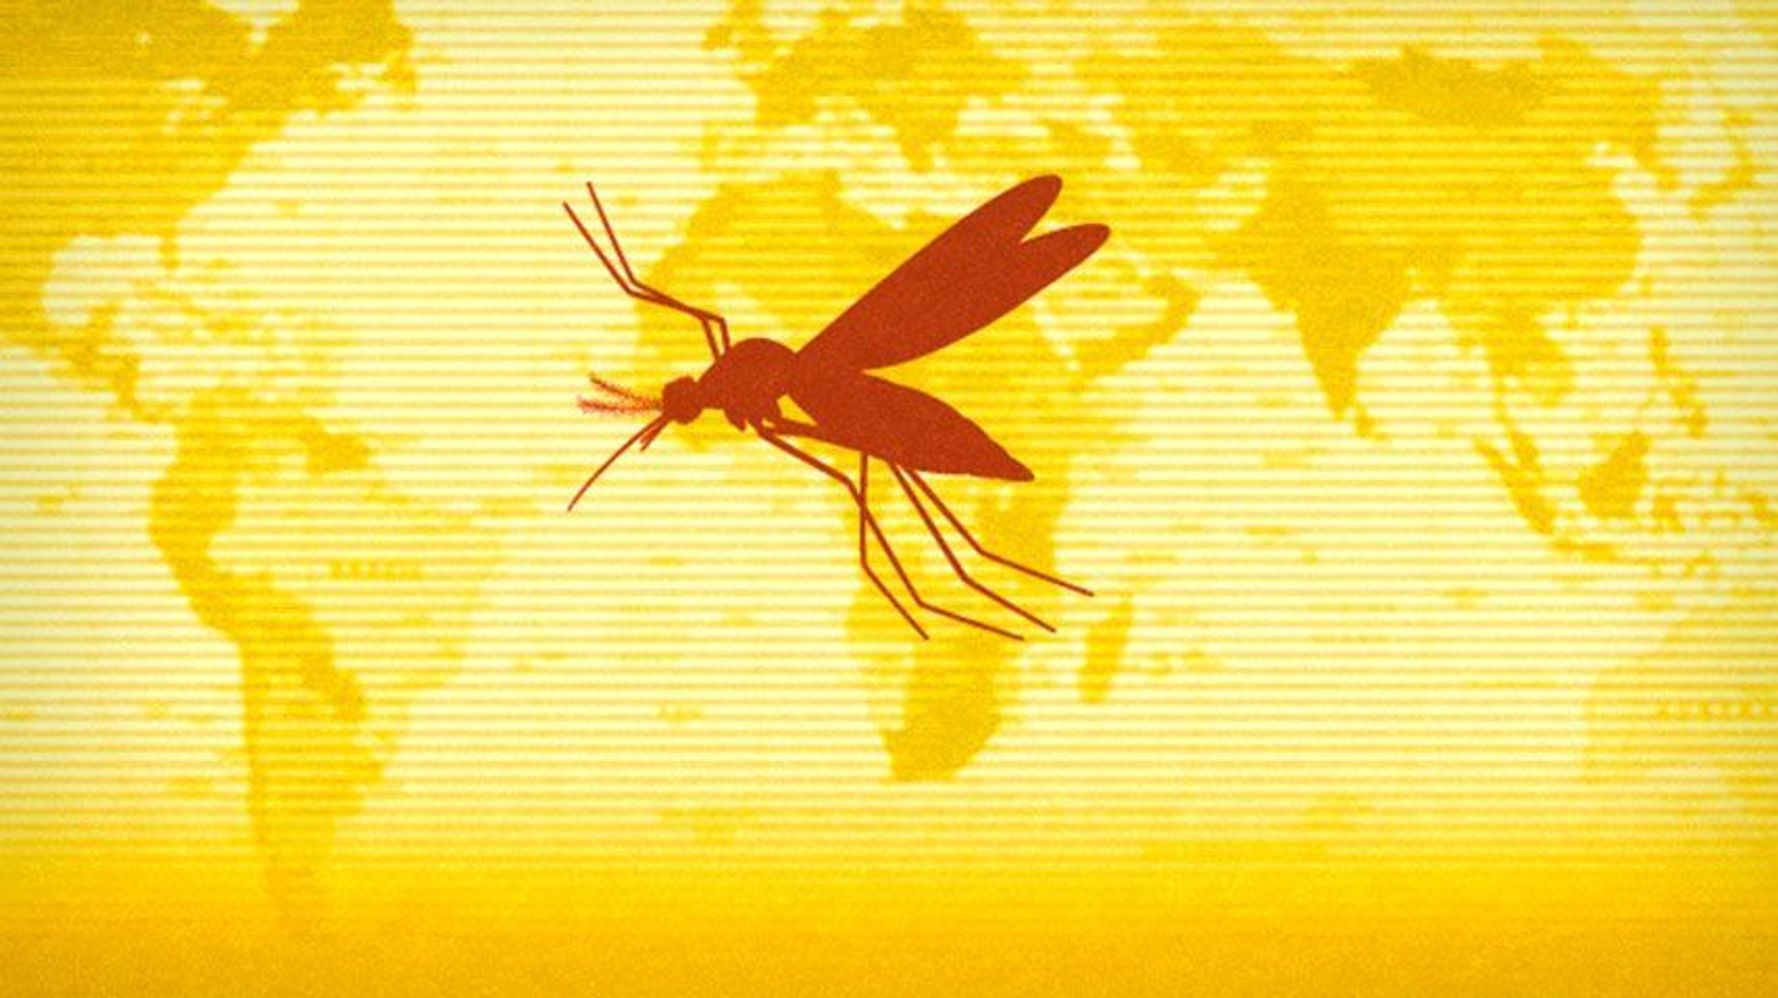 Yellow Fever Outbreak In Brazil Has Ended With 261 Deaths | HuffPost Latest  News